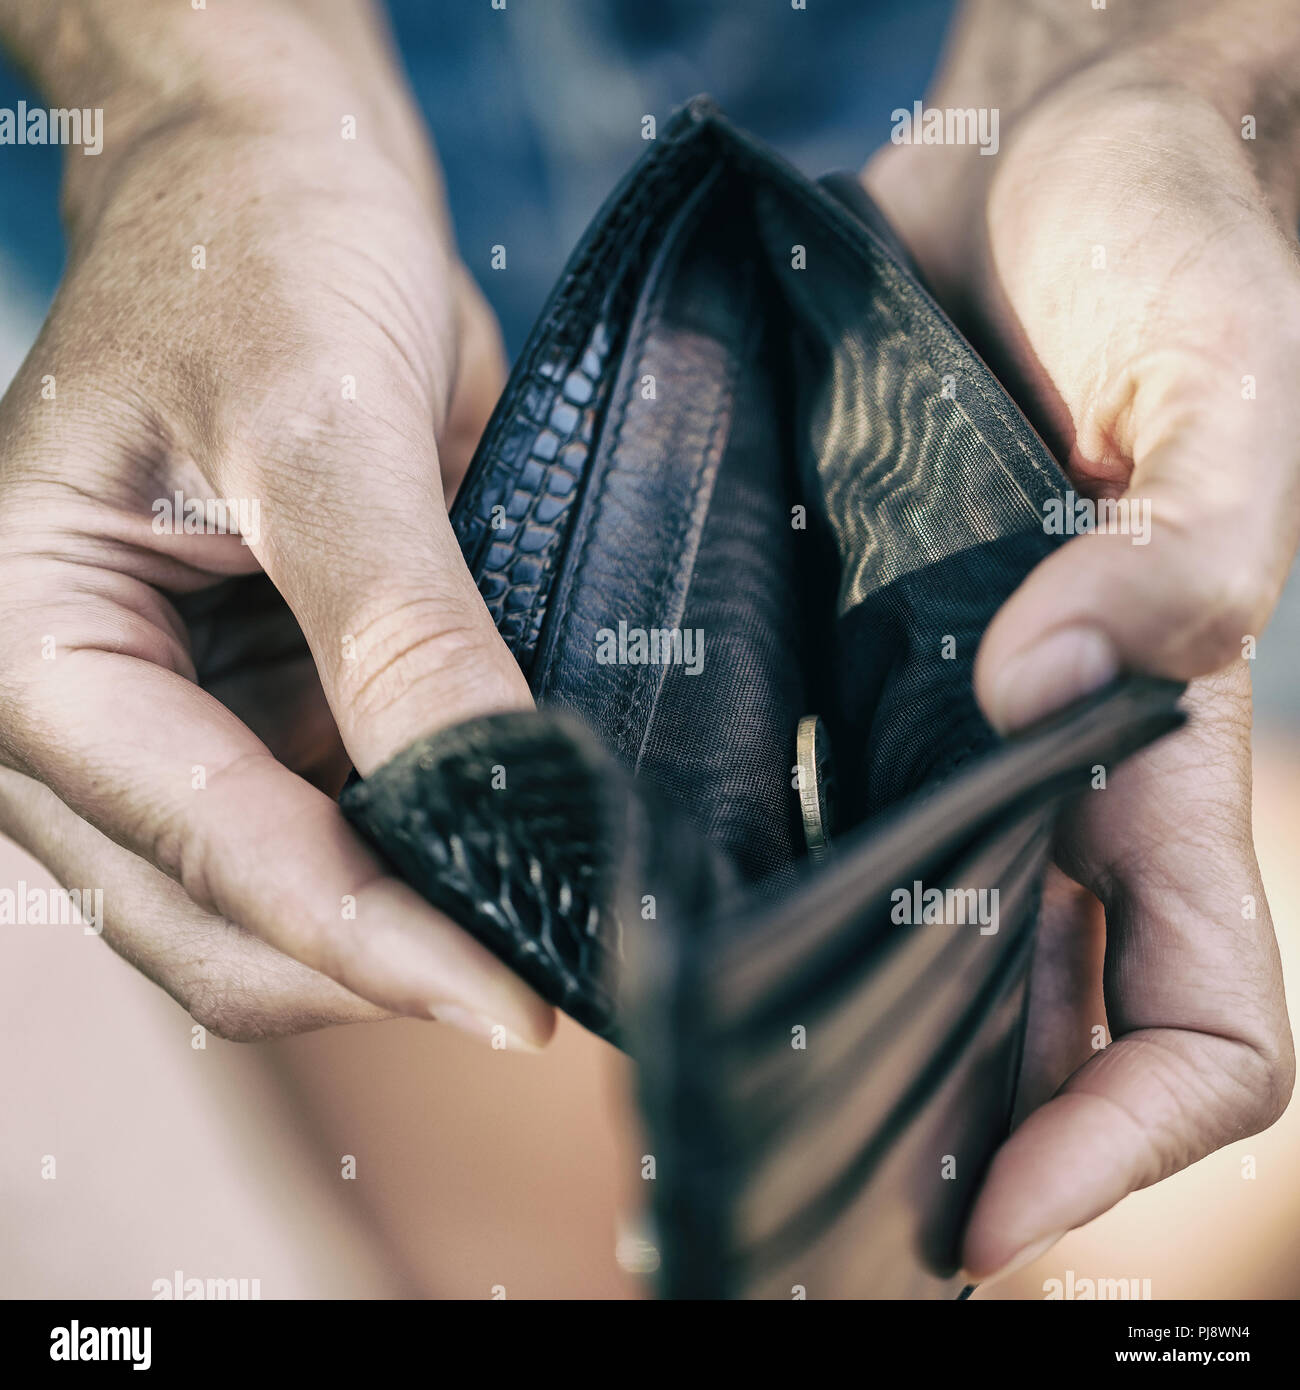 Open purse with one coin inside close-up as a sign of lack of money Stock Photo